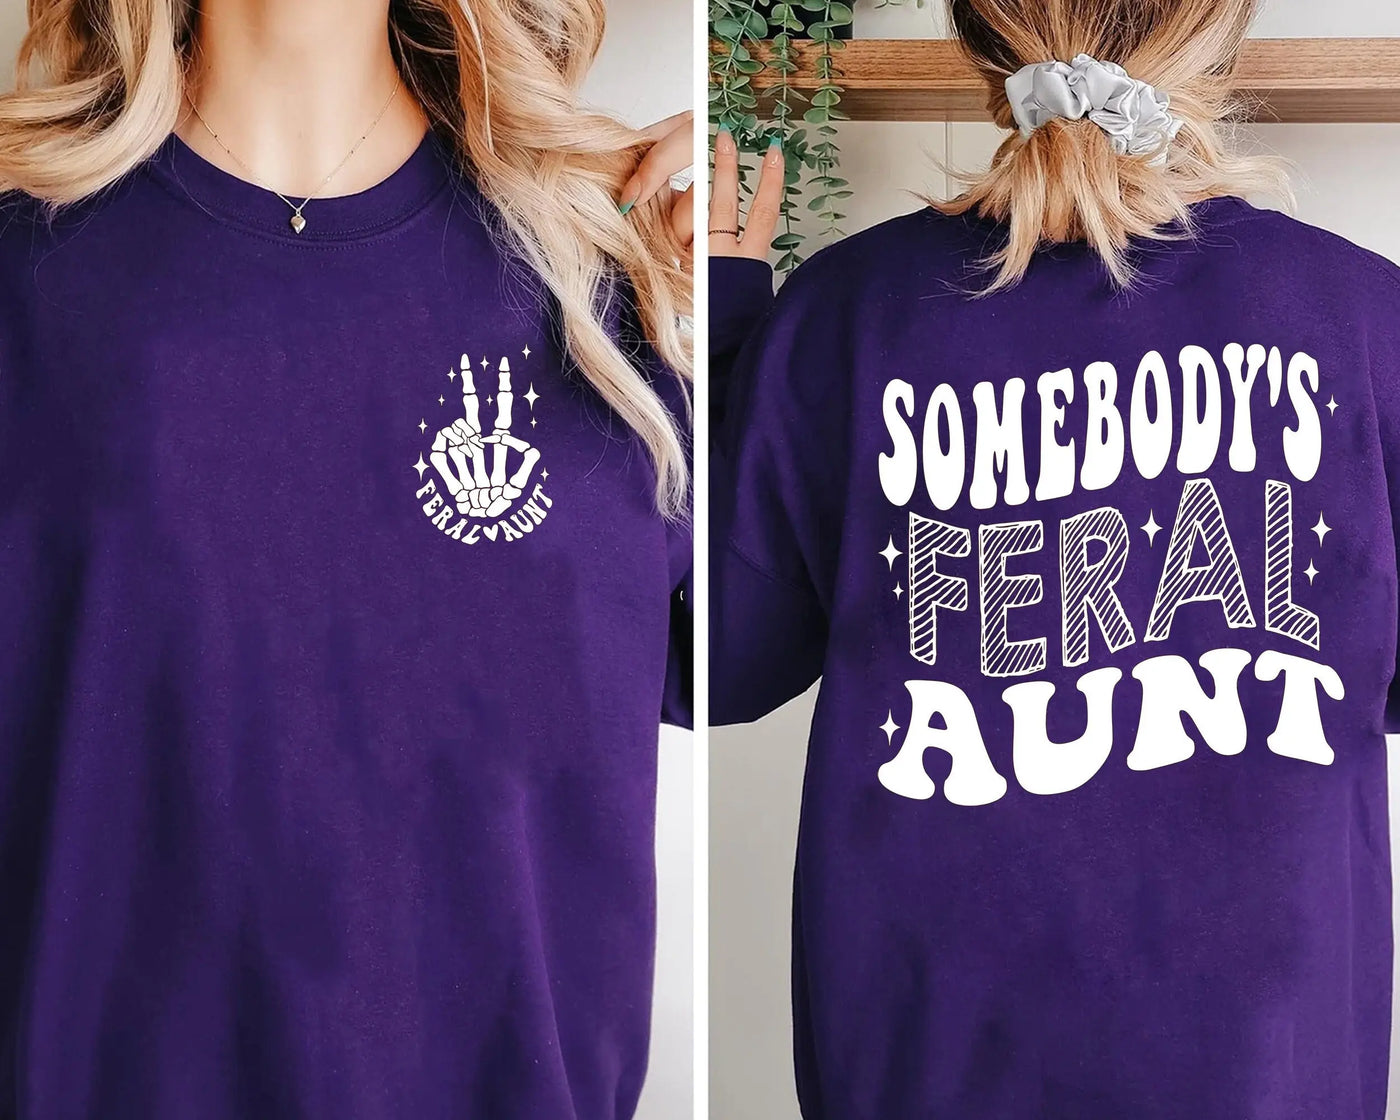 Somebody's Feral Aunt t-shirt, Cool Aunt Shirt, Feral Aunt Sweatshirt, Auntie Gift, Aunts Birthday Gifts, Sister Gifts, Auntie Sweatshirt Raveloo